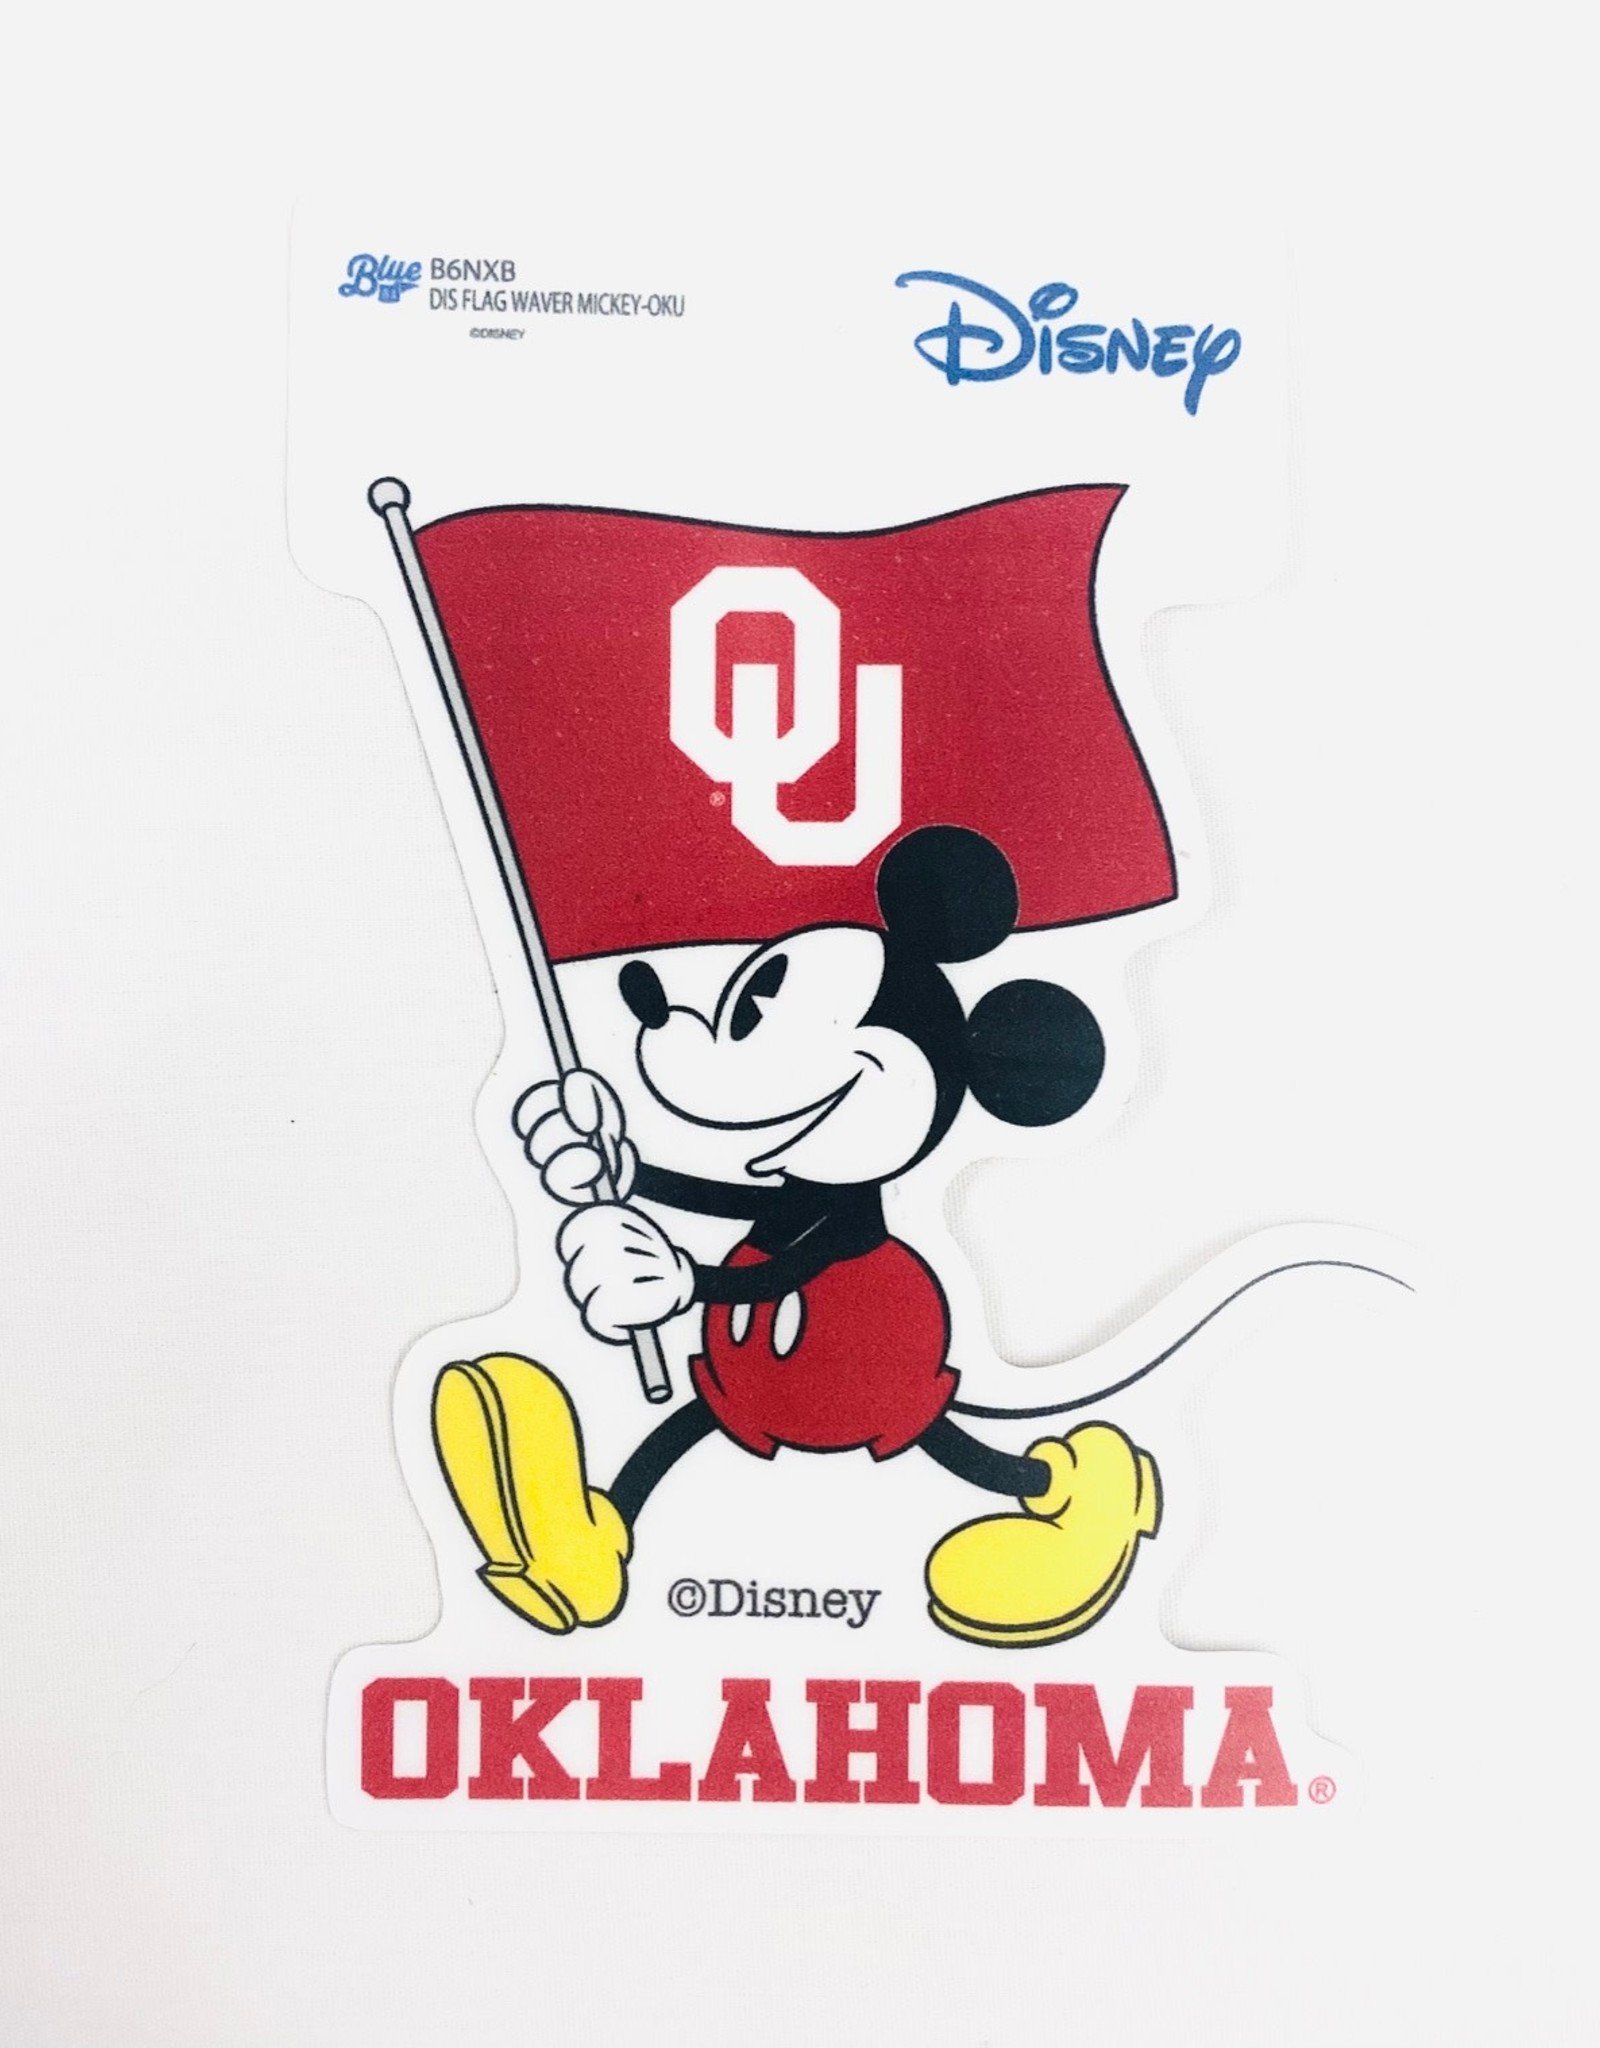 Blue 84 Blue 84 Mickey Mouse Flag Waiver Sticker